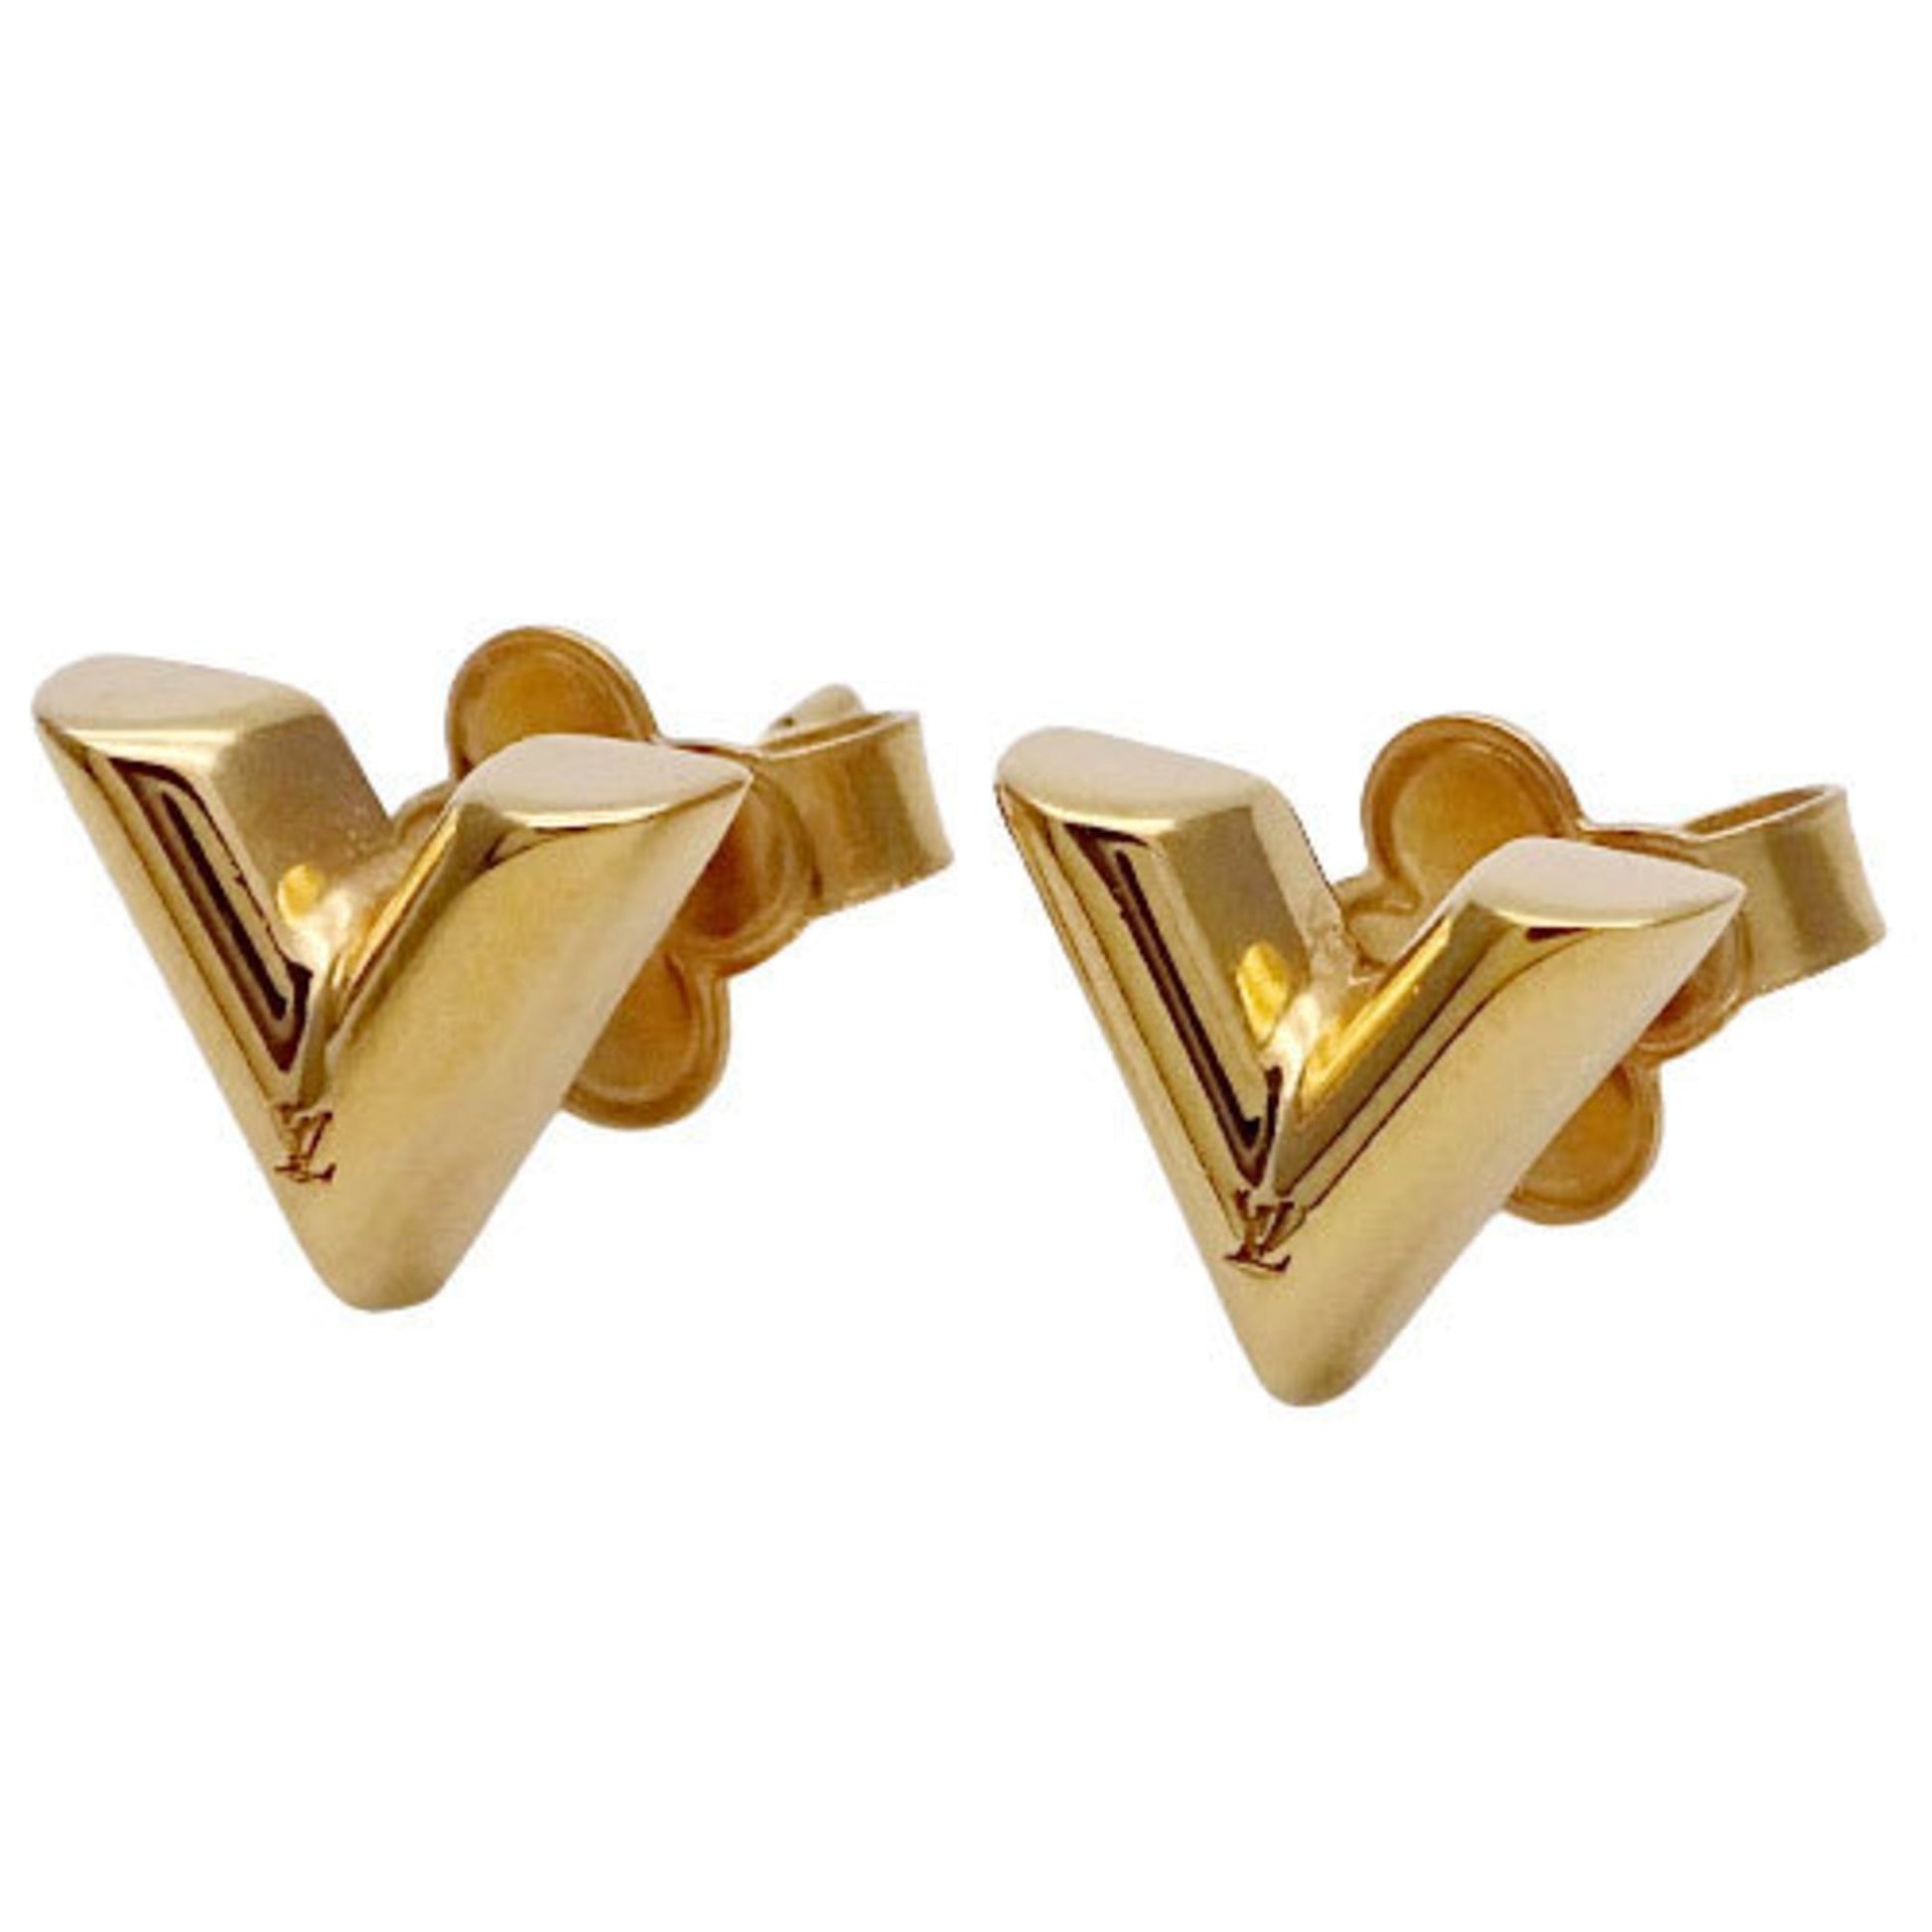 Louis Vuitton - Authenticated Earrings - Metal Gold for Women, Very Good Condition